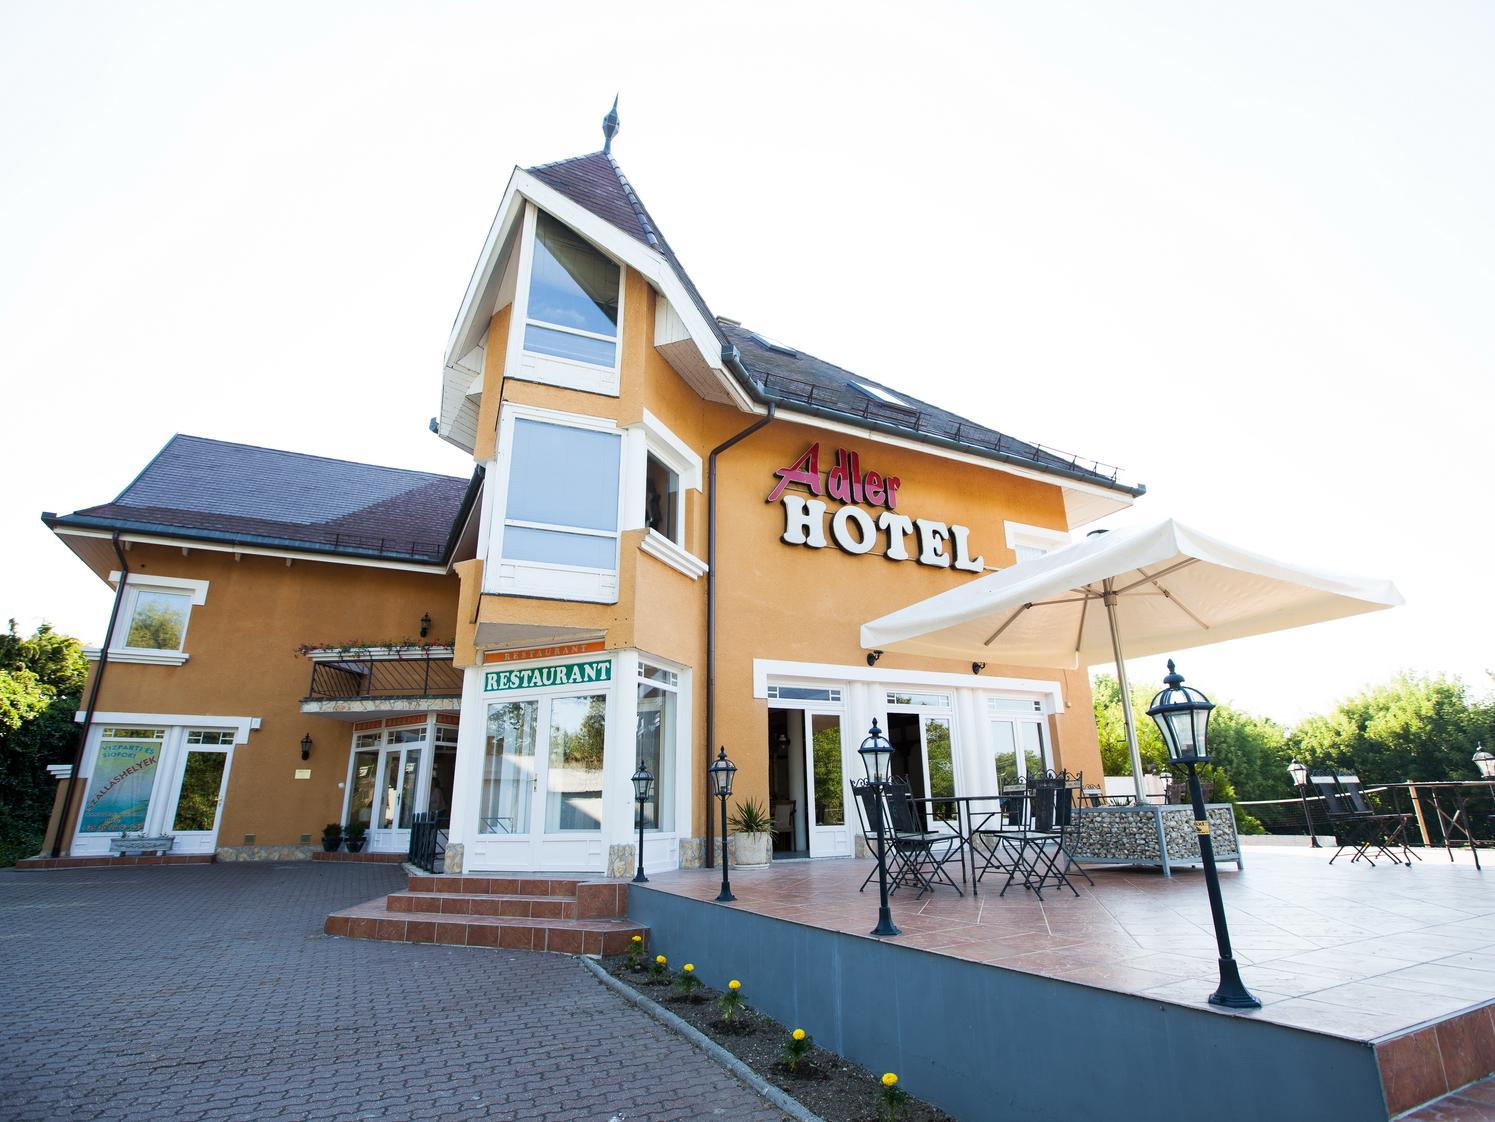 Adler Hotel Hungary
 FAQ 2016, What facilities are there in Adler Hotel Hungary
 2016, What Languages Spoken are Supported in Adler Hotel Hungary
 2016, Which payment cards are accepted in Adler Hotel Hungary
 , Hungary
 Adler Hotel room facilities and services Q&A 2016, Hungary
 Adler Hotel online booking services 2016, Hungary
 Adler Hotel address 2016, Hungary
 Adler Hotel telephone number 2016,Hungary
 Adler Hotel map 2016, Hungary
 Adler Hotel traffic guide 2016, how to go Hungary
 Adler Hotel, Hungary
 Adler Hotel booking online 2016, Hungary
 Adler Hotel room types 2016.